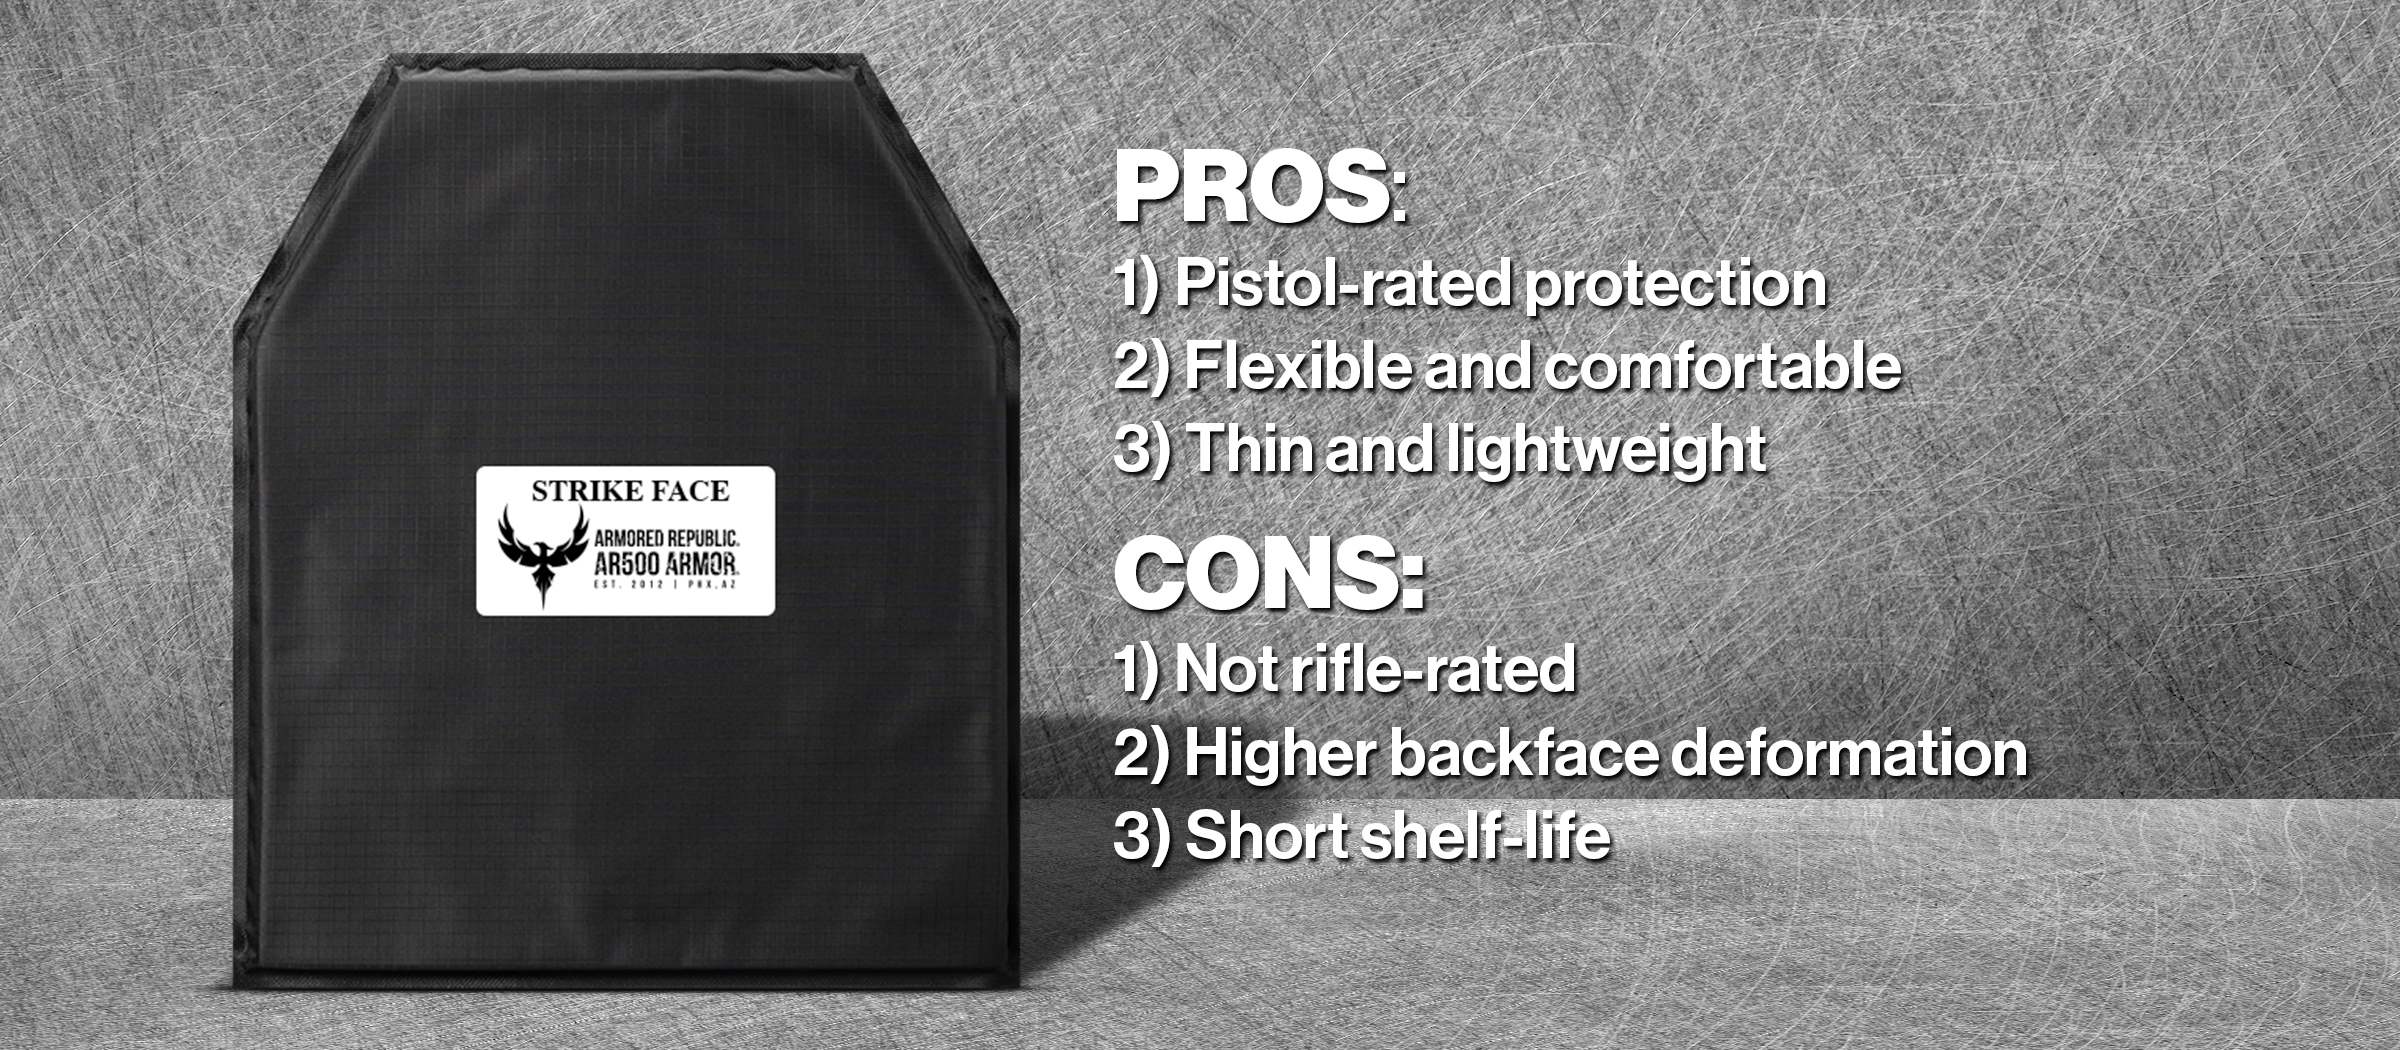 Pros of Soft Body Armor from Armored Republic